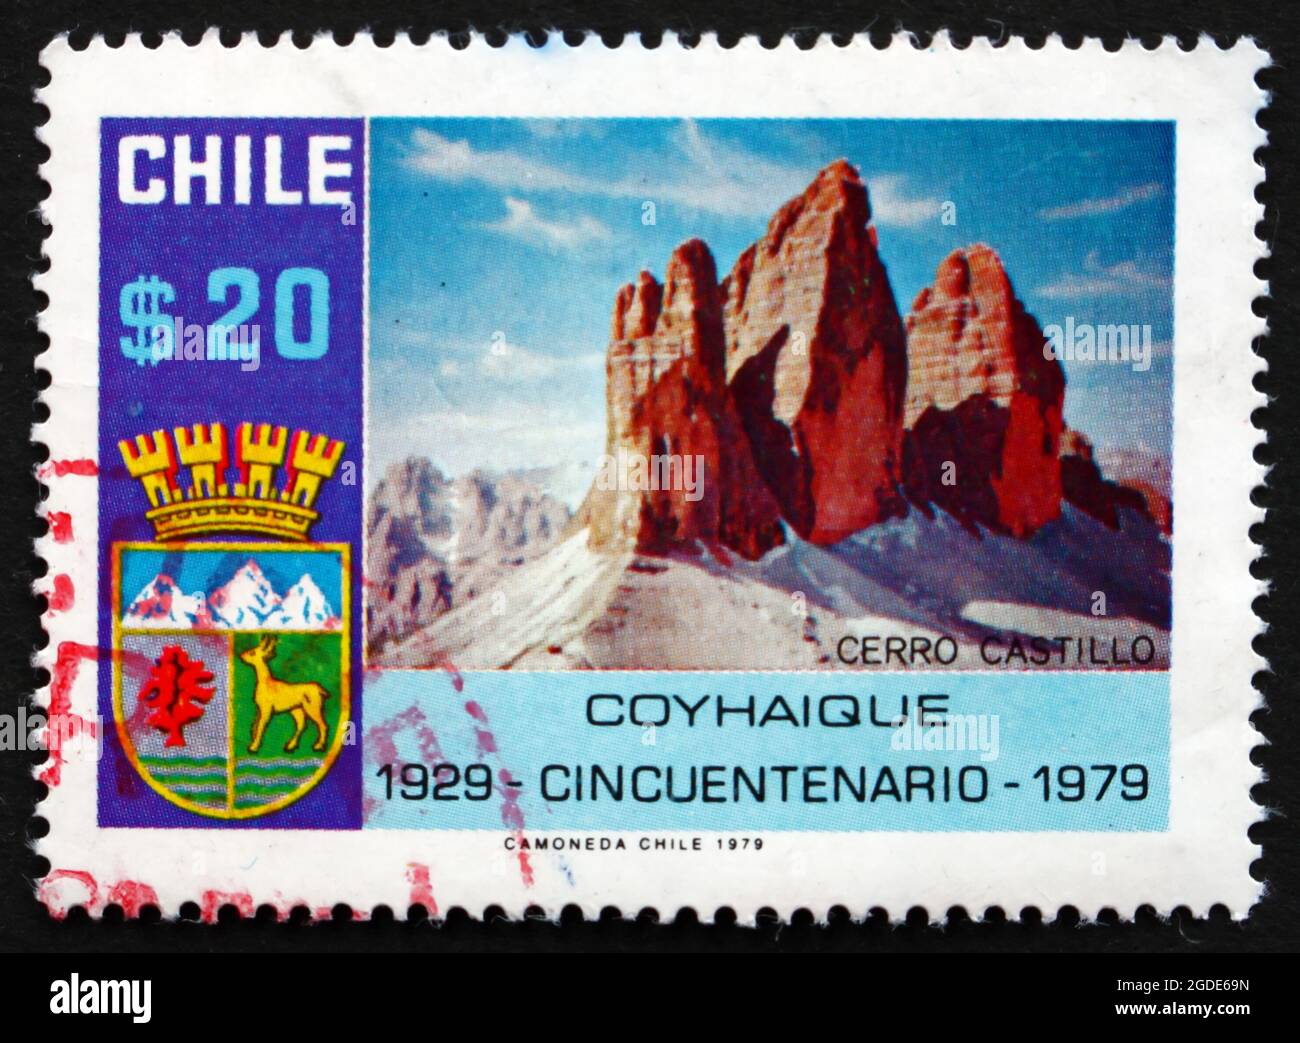 CHILE - CIRCA 1979: a stamp printed in the Chile shows Coat of Arms and Mt. Castillo, 50th Anniversary of Coyhaique, City in Patagonia, circa 1979 Stock Photo